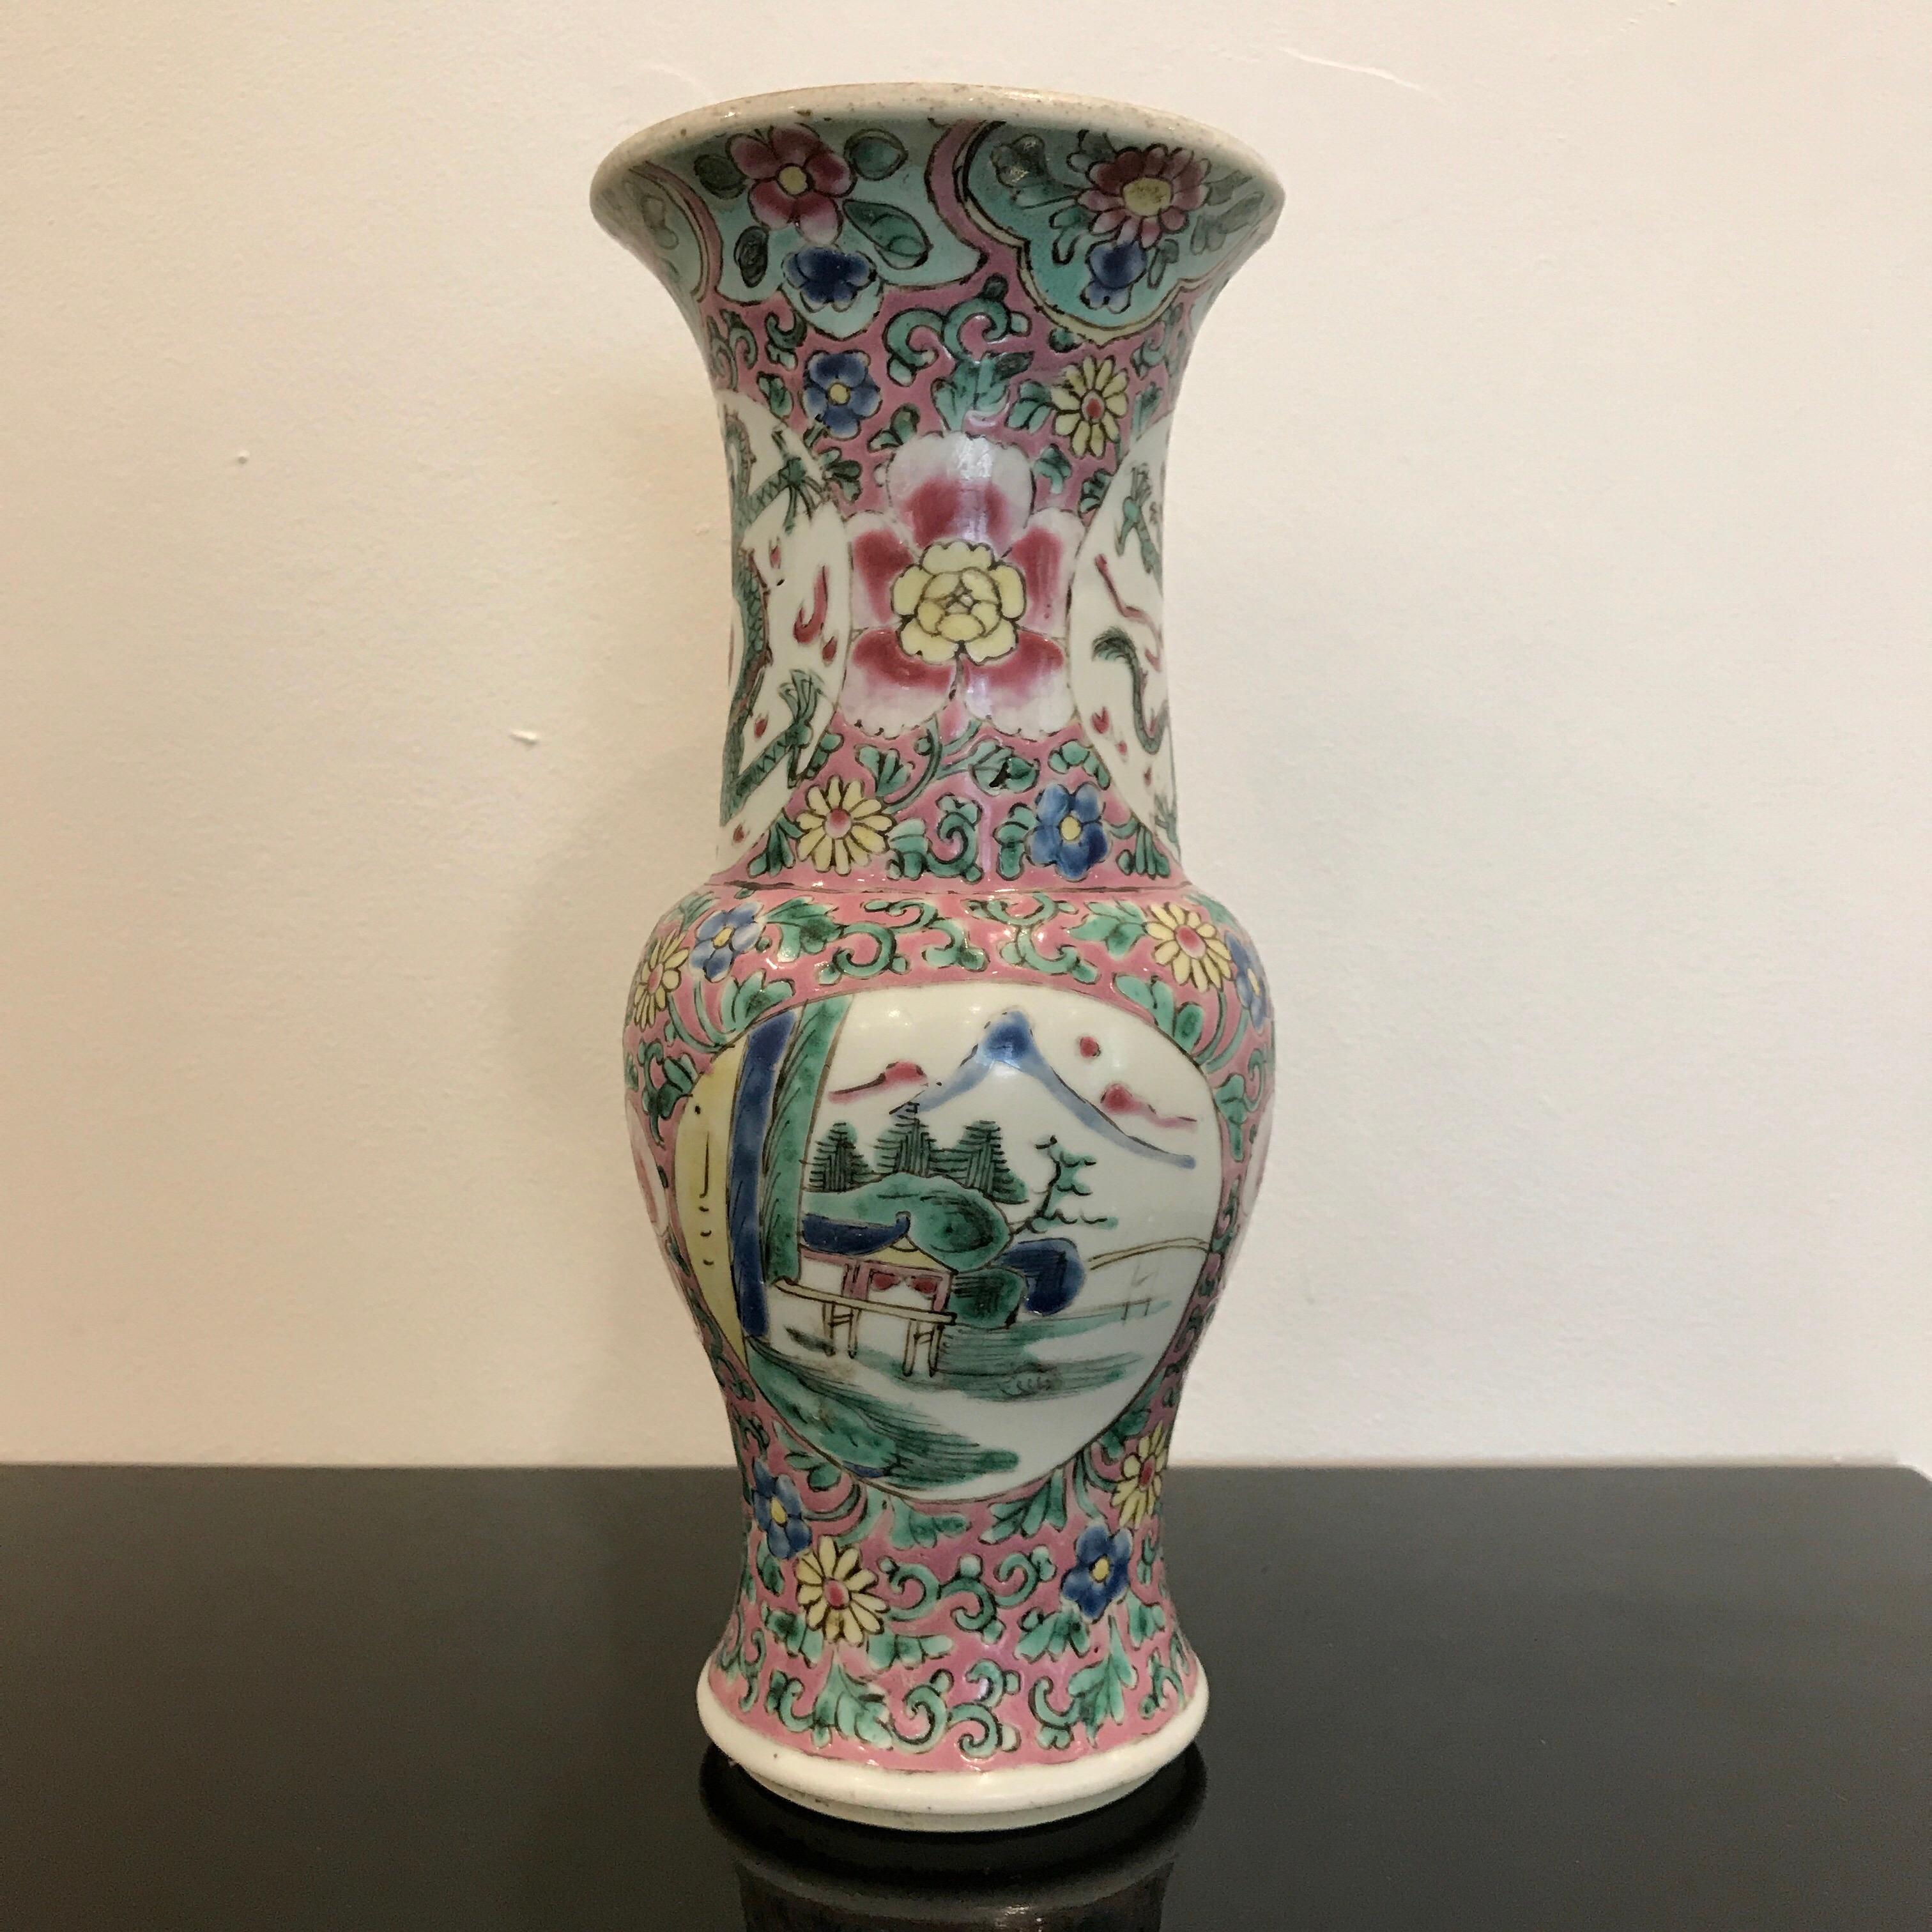 19th century Famille Verte Chinese export vase, finely decorated well made early 19th century or older
Provenance: Atlanta Antiques Exchan
Measures: 9.5